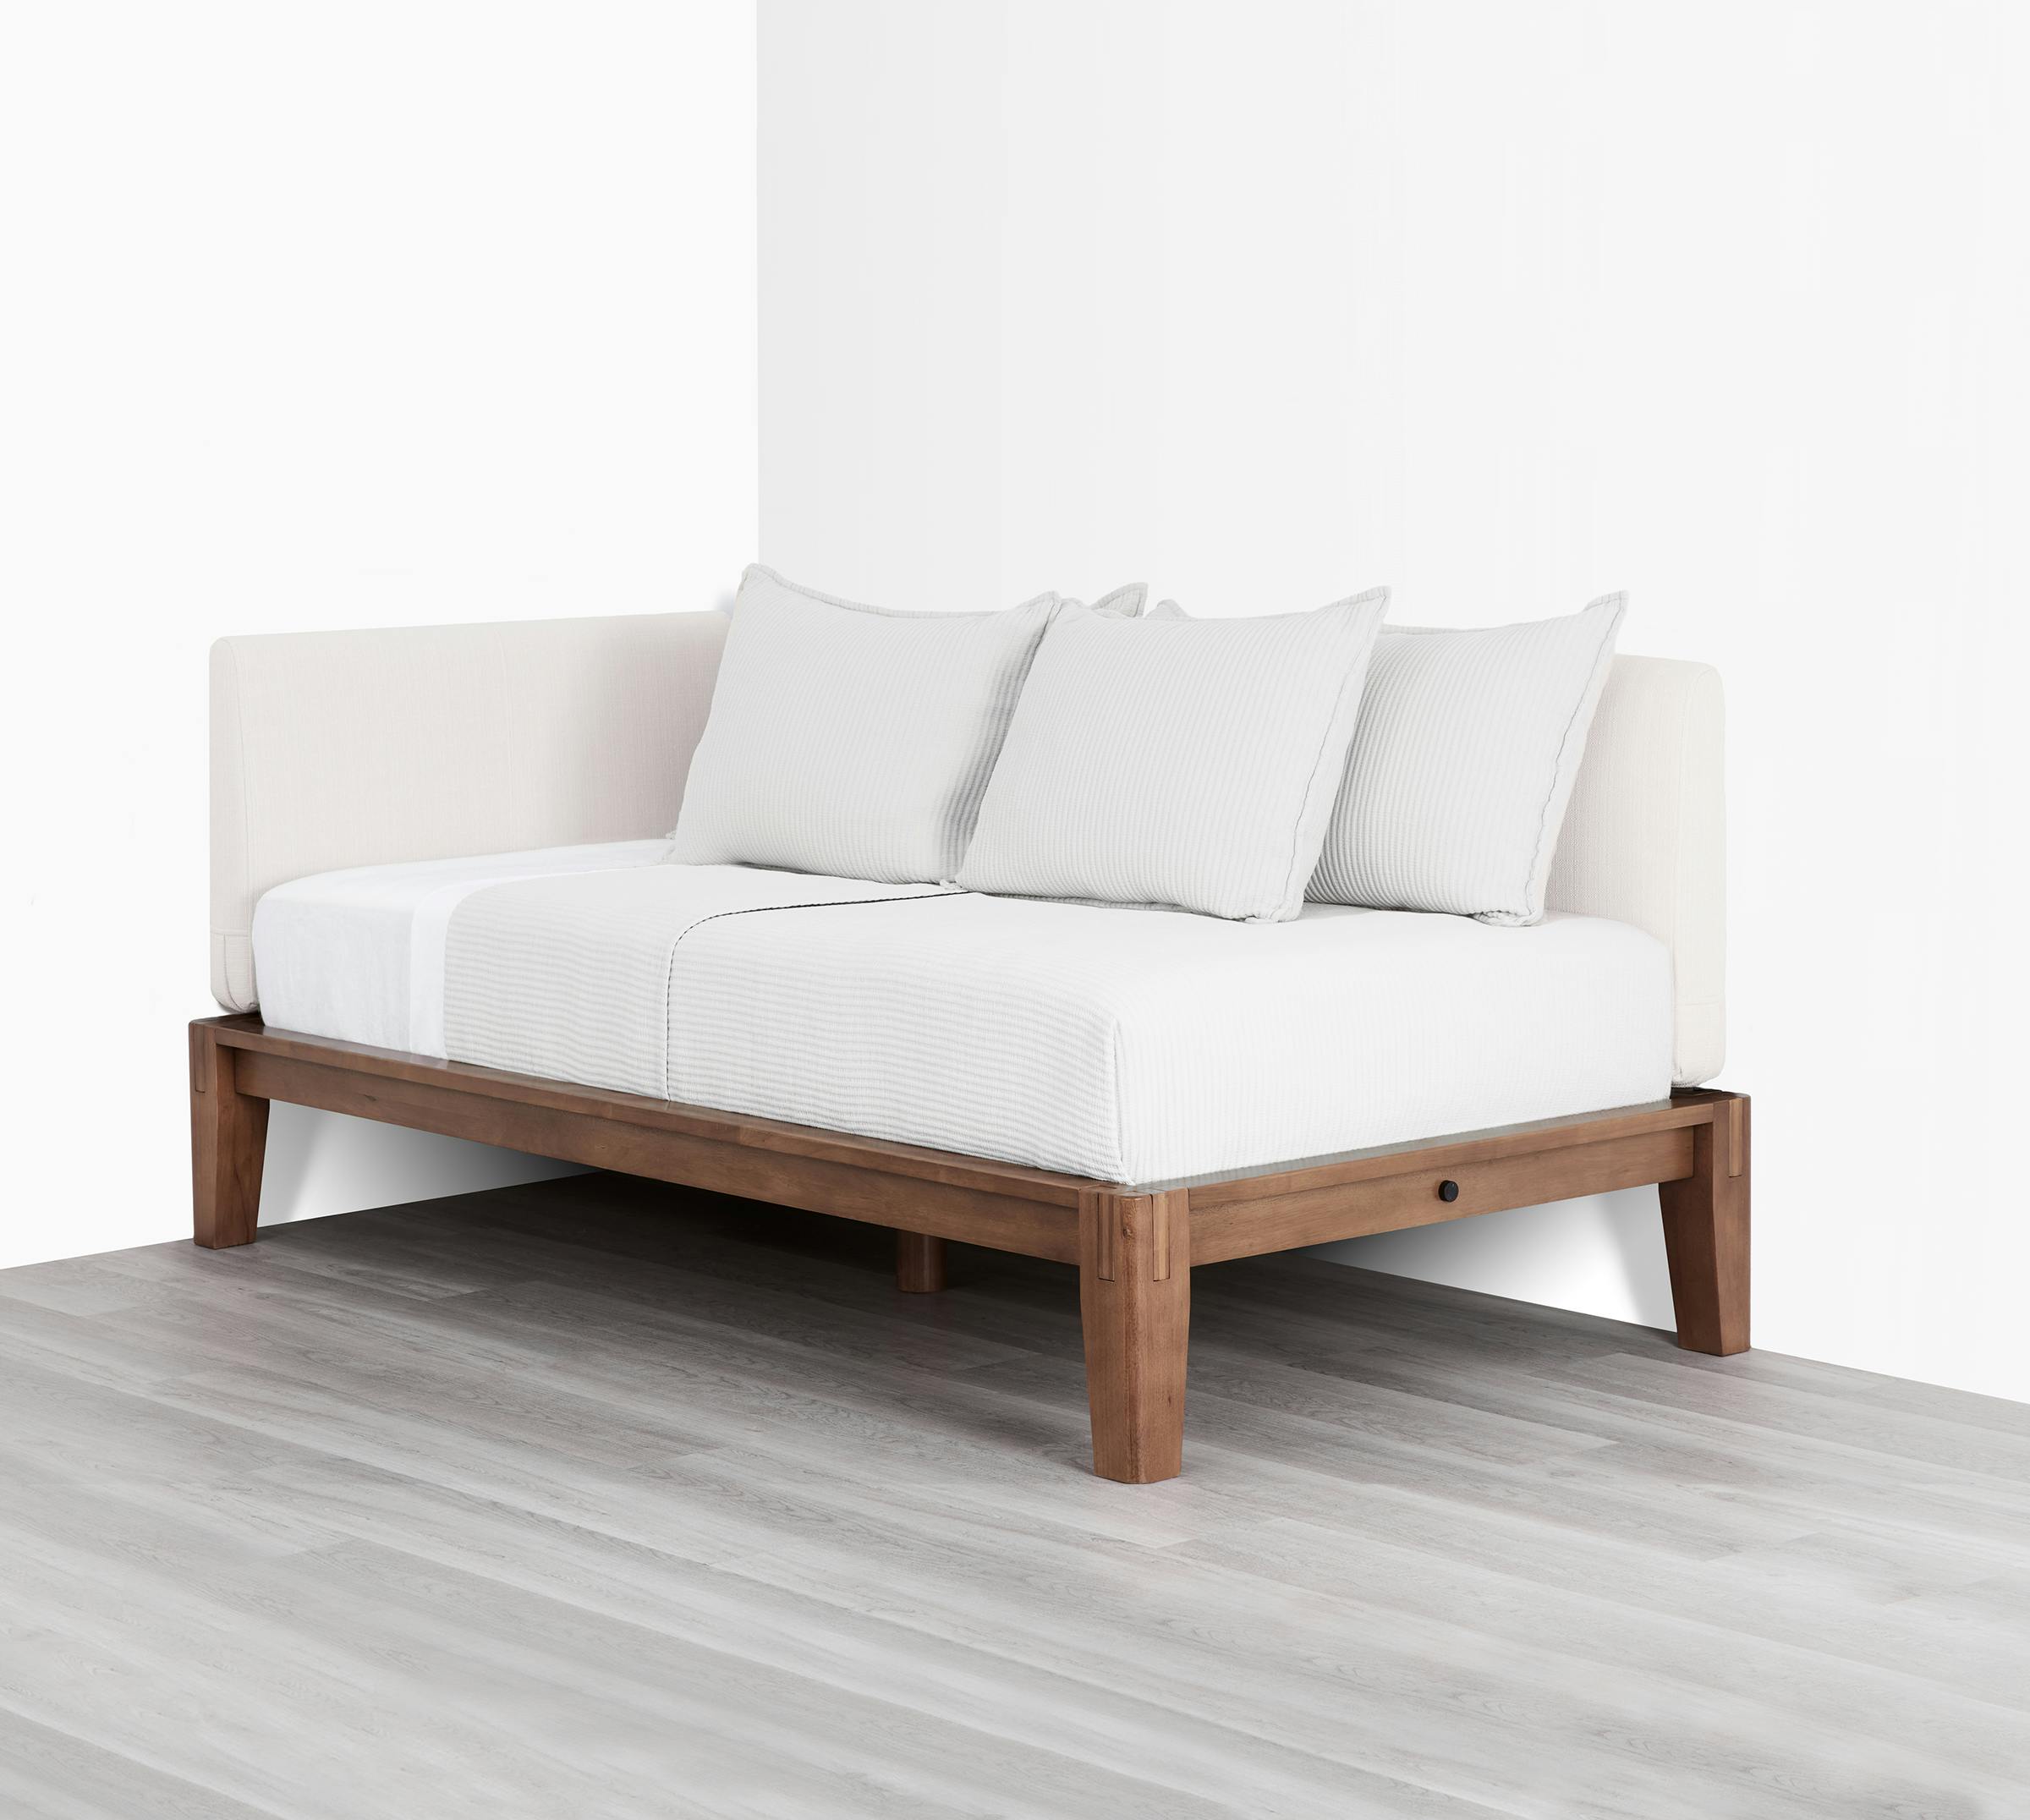 The Bed (Daybed / Walnut / Light Linen) - Diagonal 3